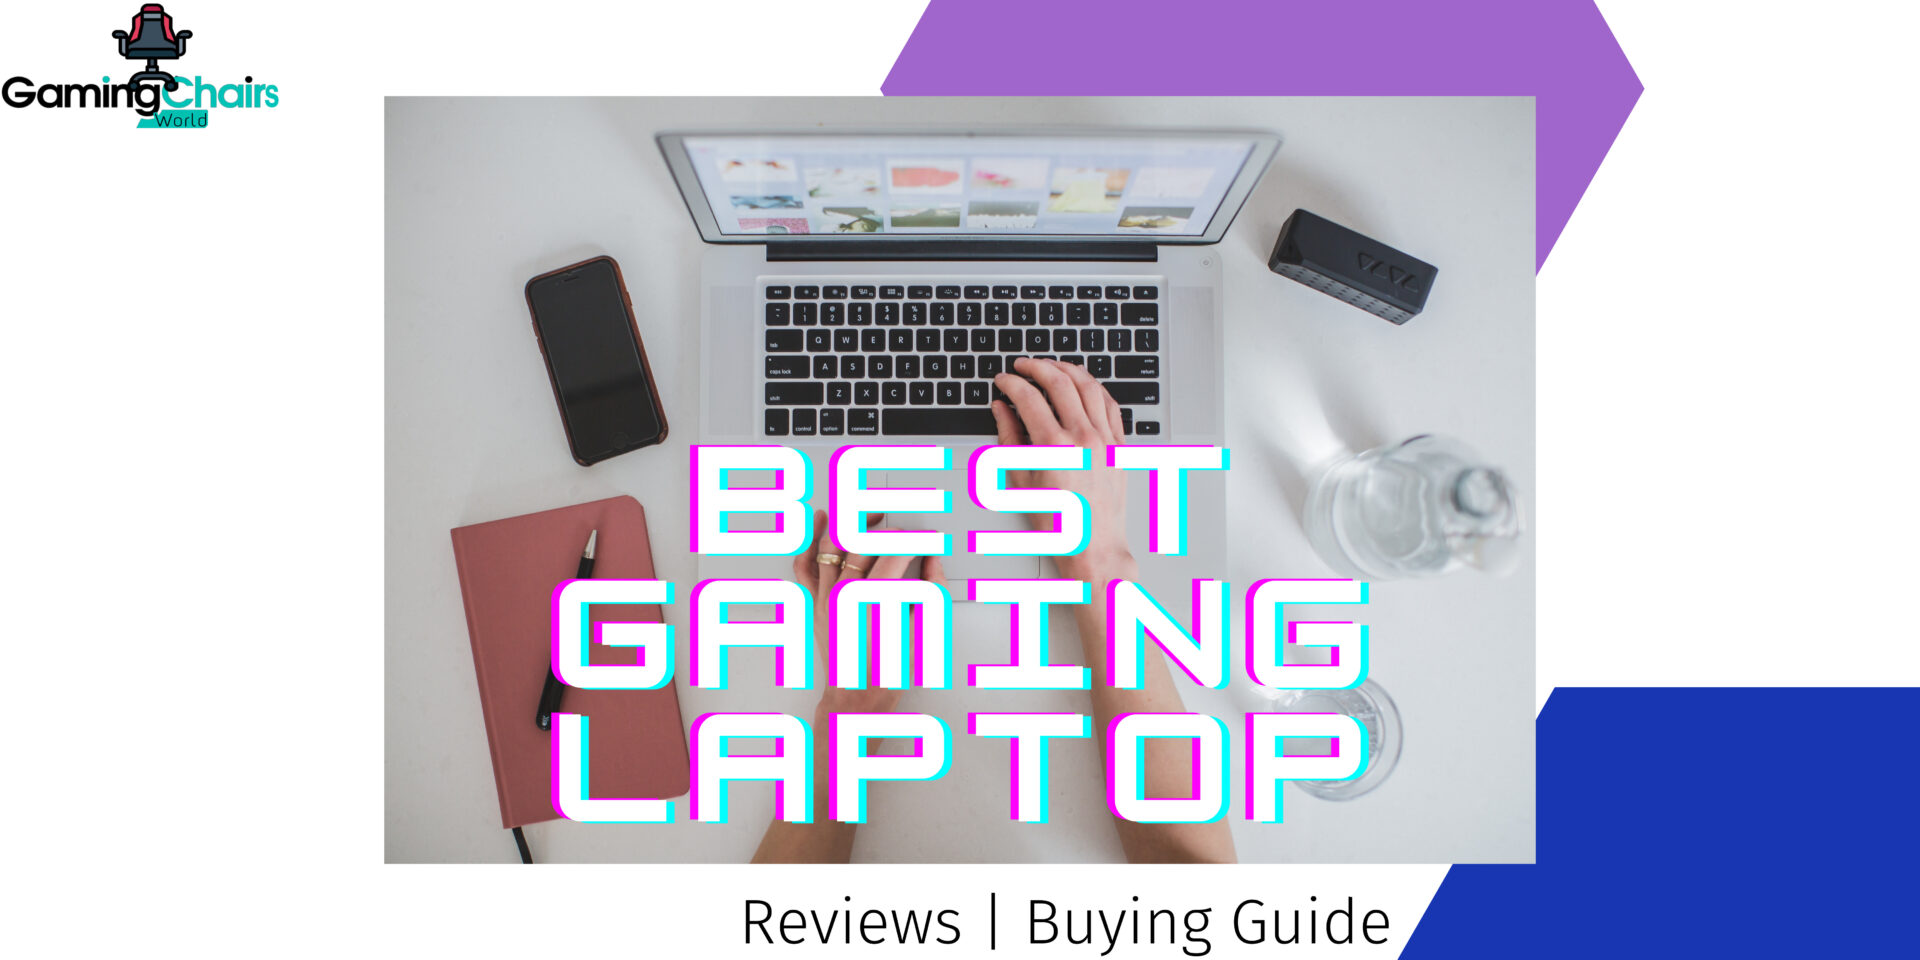 7 Best Laptop for Minecraft under 200 $ {2022 Review & Buyer’s Guide}